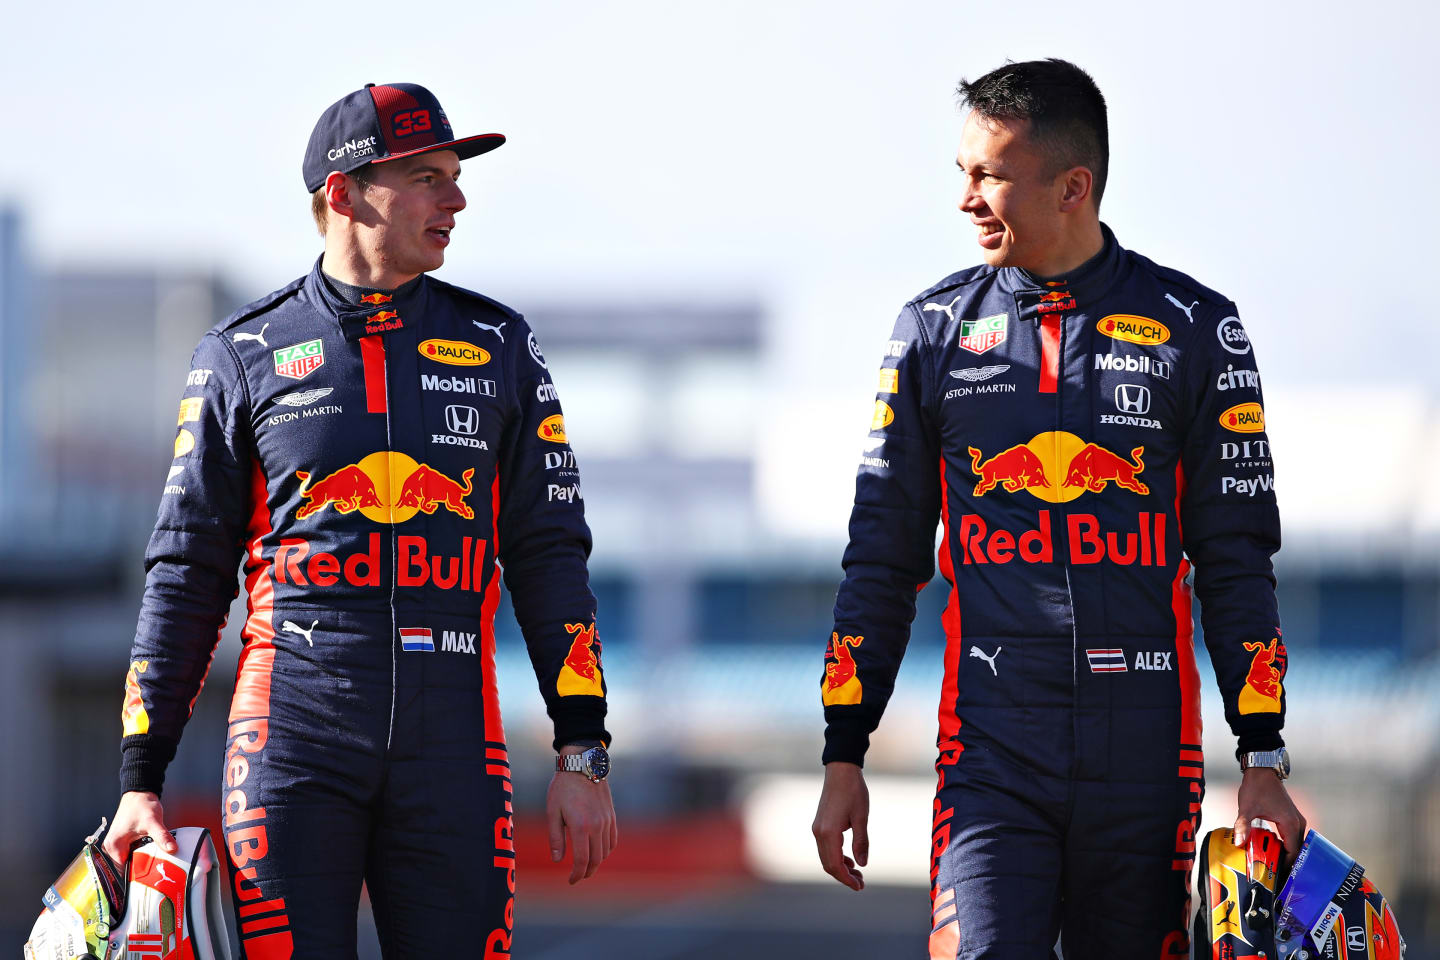 Drivers Max Verstappen and Alex Albon were in attendance to test the new car